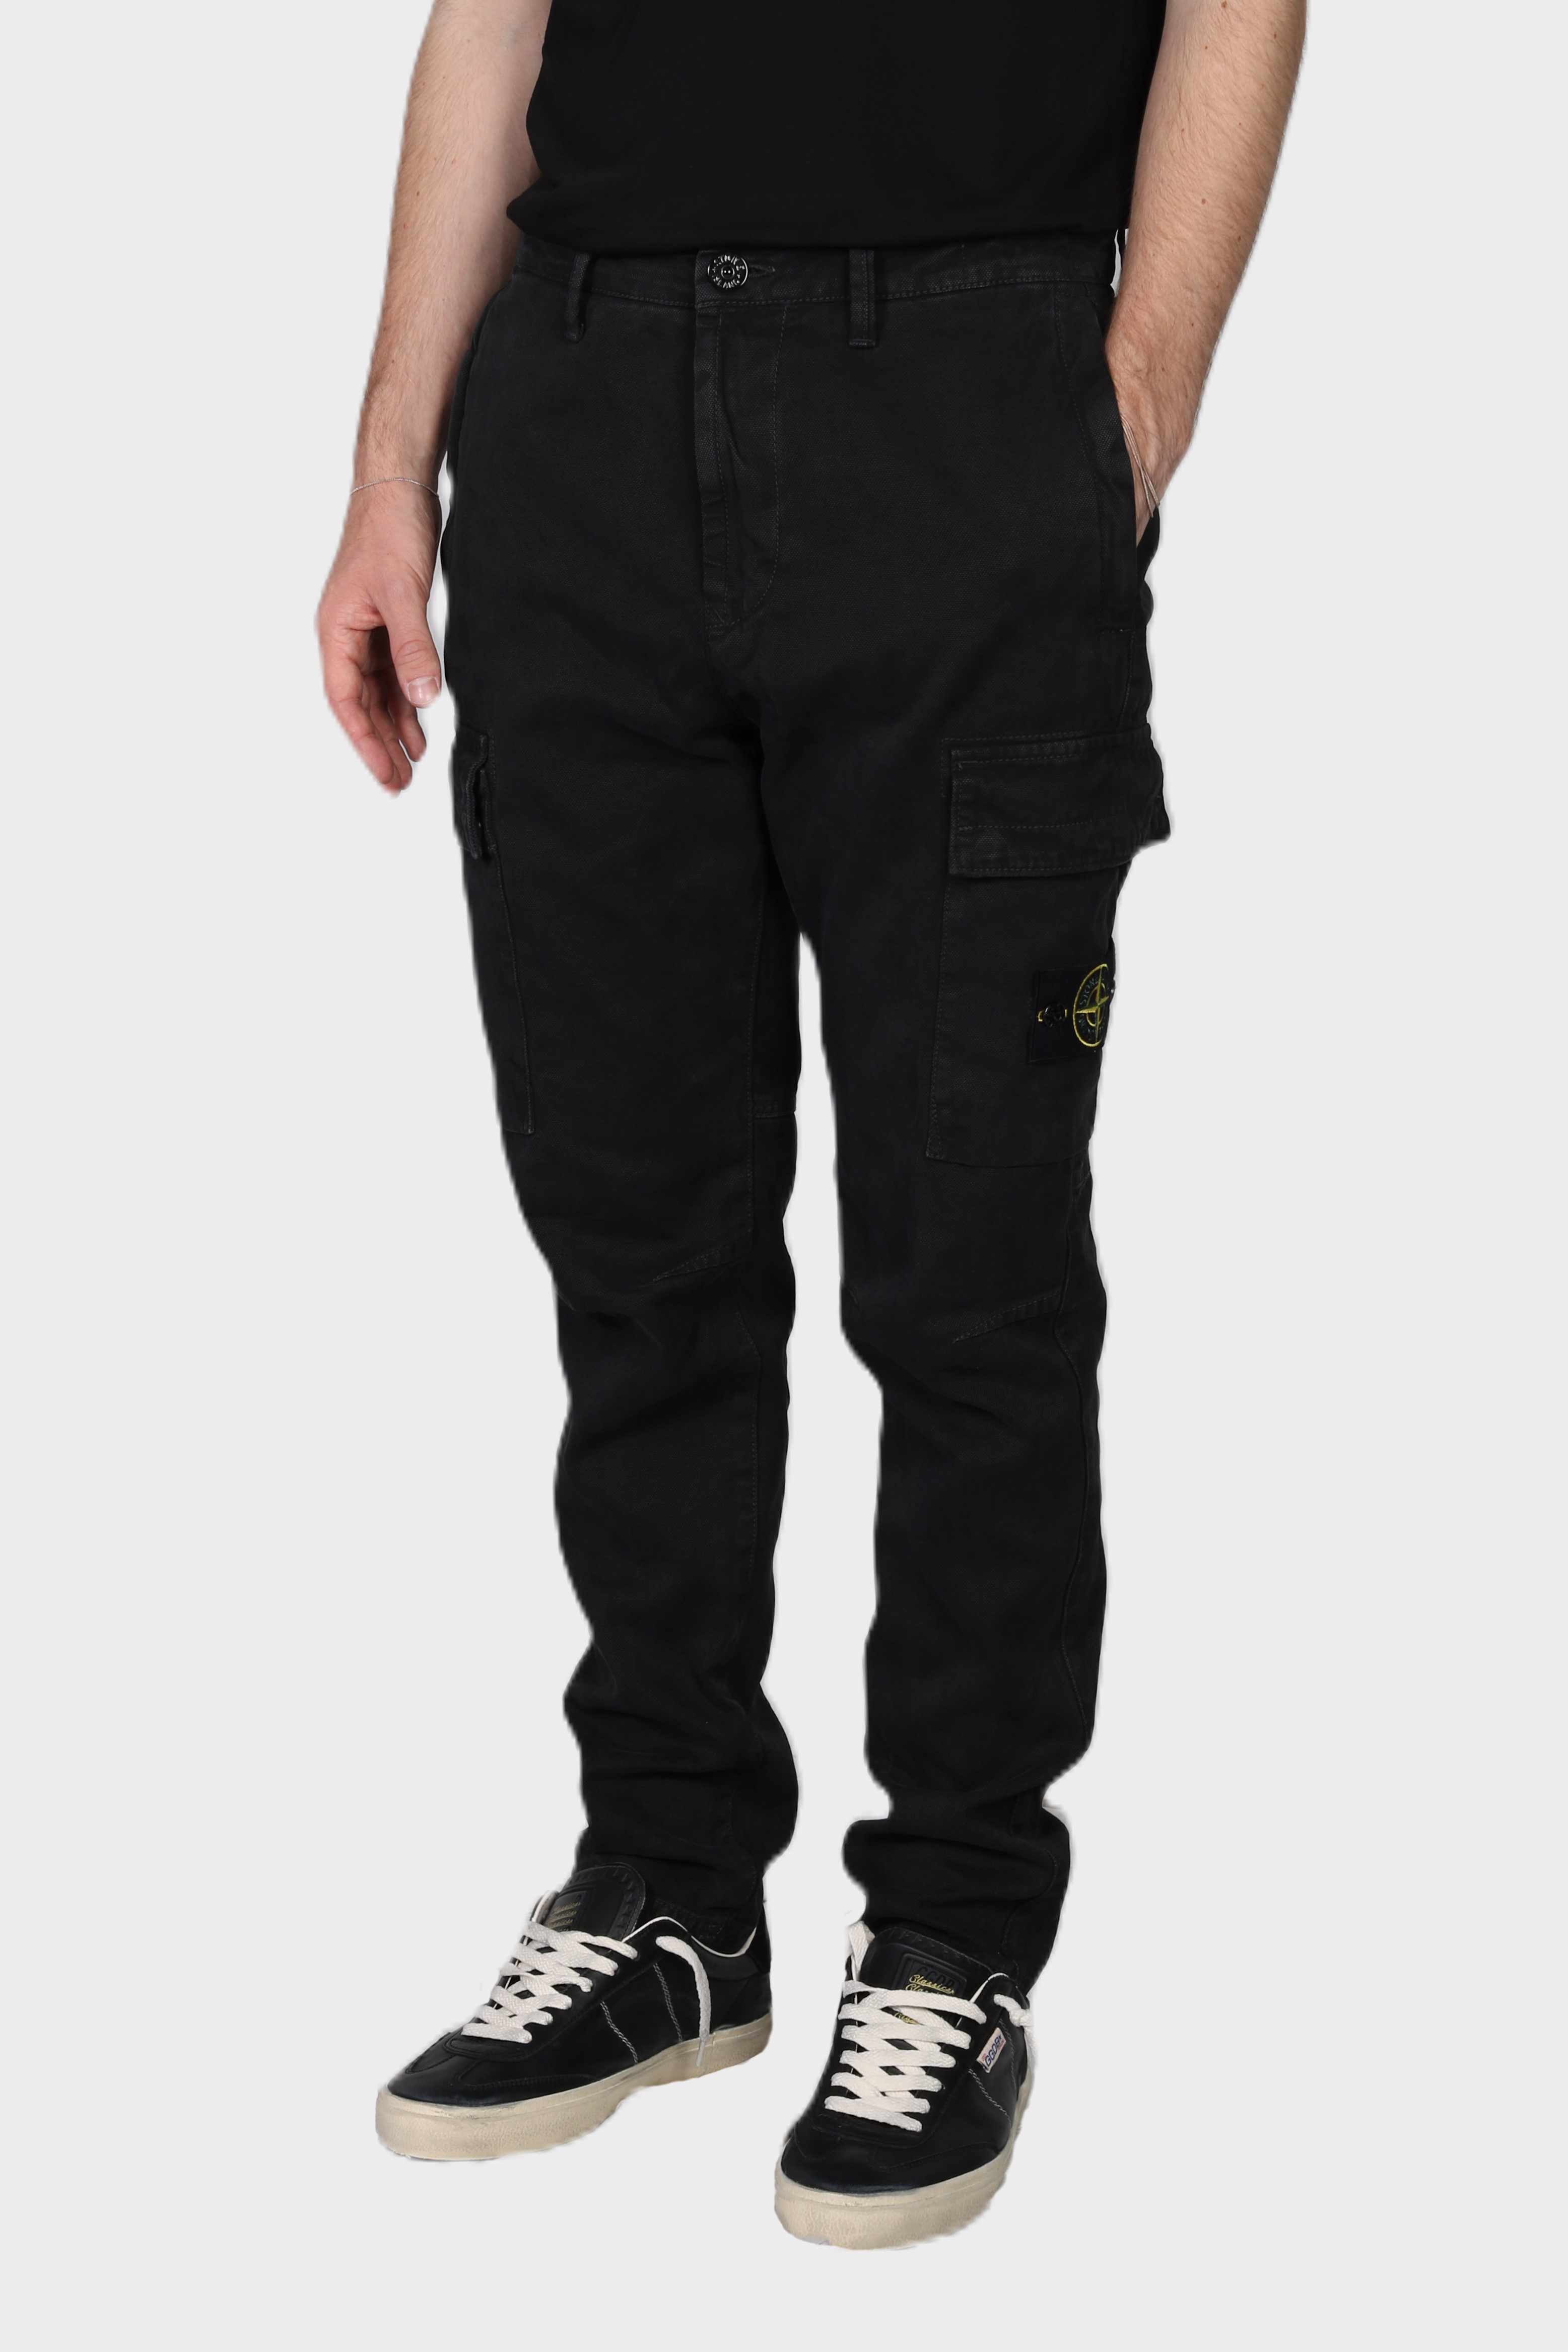 STONE ISLAND Cotton Canvas Cargo Pant in Washed Black